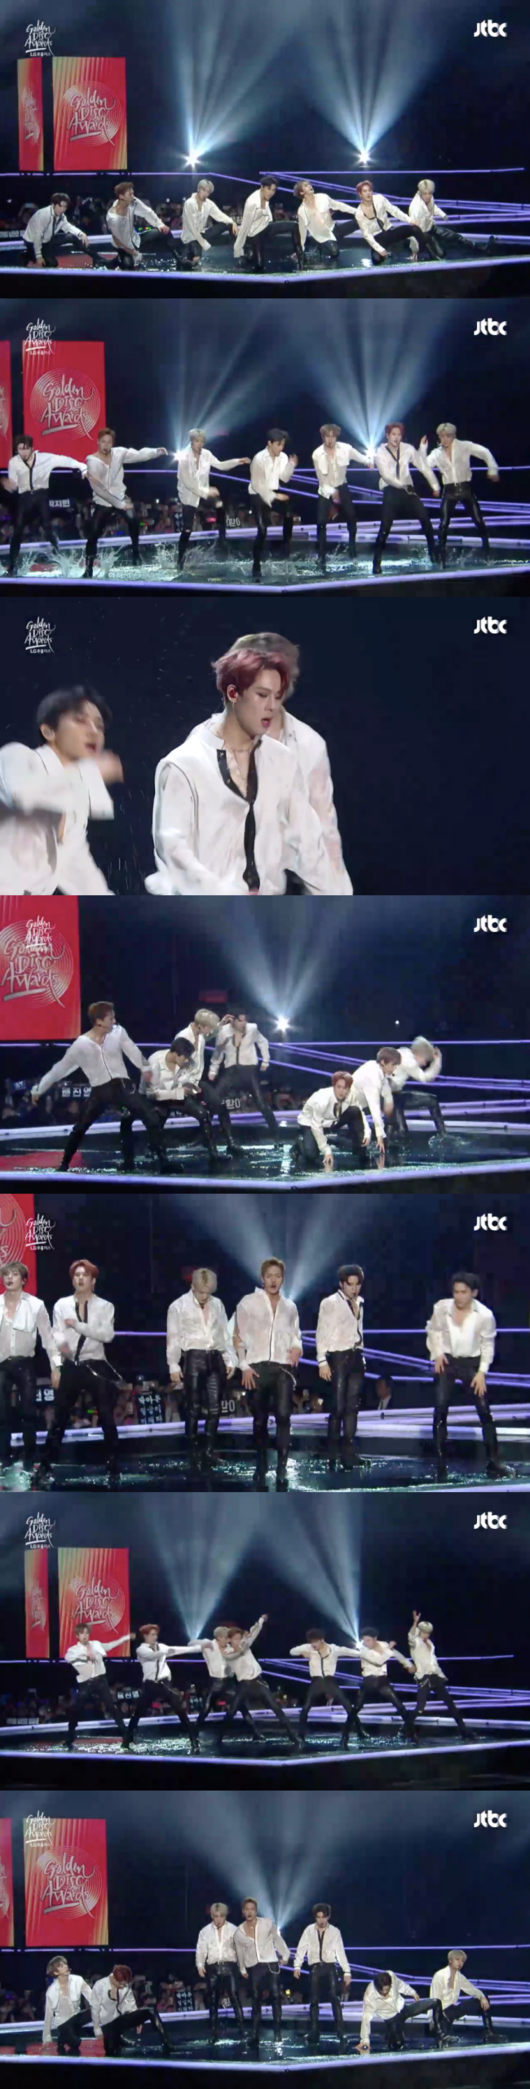 The all-time water performance of boy group Monsta X is drawing attention. It was a special stage where Monsta Xs intense sexy was outstanding.Monsta X won the award at the 33rd Golden Disc Awards Awards album awards held on the afternoon of the 6th.Monsta X has expressed gratitude to its agency Starship Entertainment and fans since the awards.Especially on this day, Monsta X focused on the Sight by providing a special stage as well as the awards.Since the awards, it has been called the so-called water show and has been gathering topics in the online fan community.Monsta X set the stage for Myself, Crazy, Jealousy, and Shoot Out at this awards.It is Monsta X, which brings out the shouts of fans with a performance that fills the wide stage.Above all, the water show that decorated the second half of the performance focused on Sight. Monsta X moved to perform Shoot Out.It was then Monsta X, standing on a water-splattered stage and performing spectacular performances, a stage so intense and rich that it was called a water show.Monsta X made its distinctive intense and charismatic performance even more special: a stage that has attracted great attention even after the Awards, with the shouts of fans.It was a performance that left an extraordinary and intense afterlife of Monsta X down.Monsta X said through the official SNS after the awards, Monbebe has given Monsta X a meaningful award, and I really appreciate it.I will be Monsta X, who will repay the love you gave me in 2019. broadcast screen capture